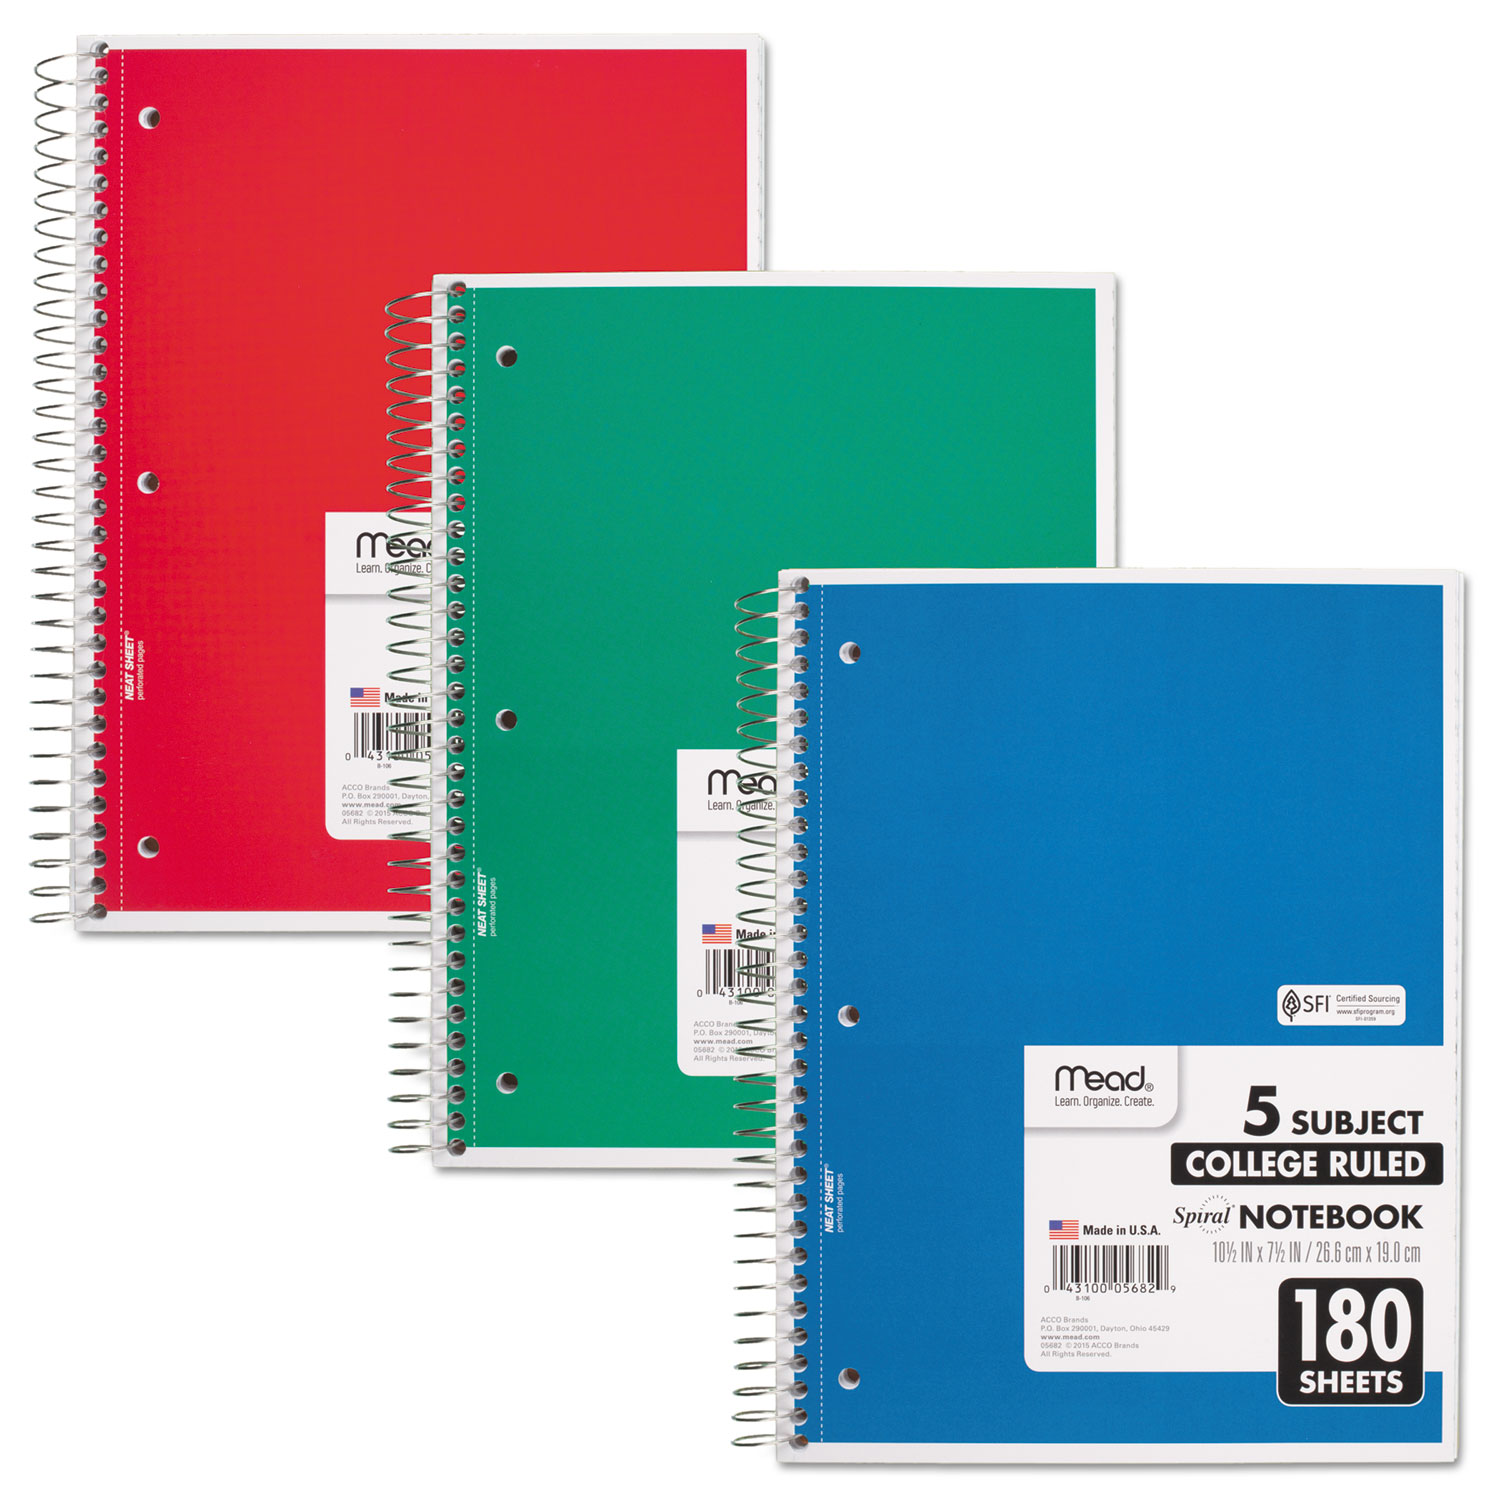  Mead 05682 Spiral Notebook, 5 Subjects, Medium/College Rule, Assorted Color Covers, 10.5 x 8, 180 Sheets (MEA05682) 